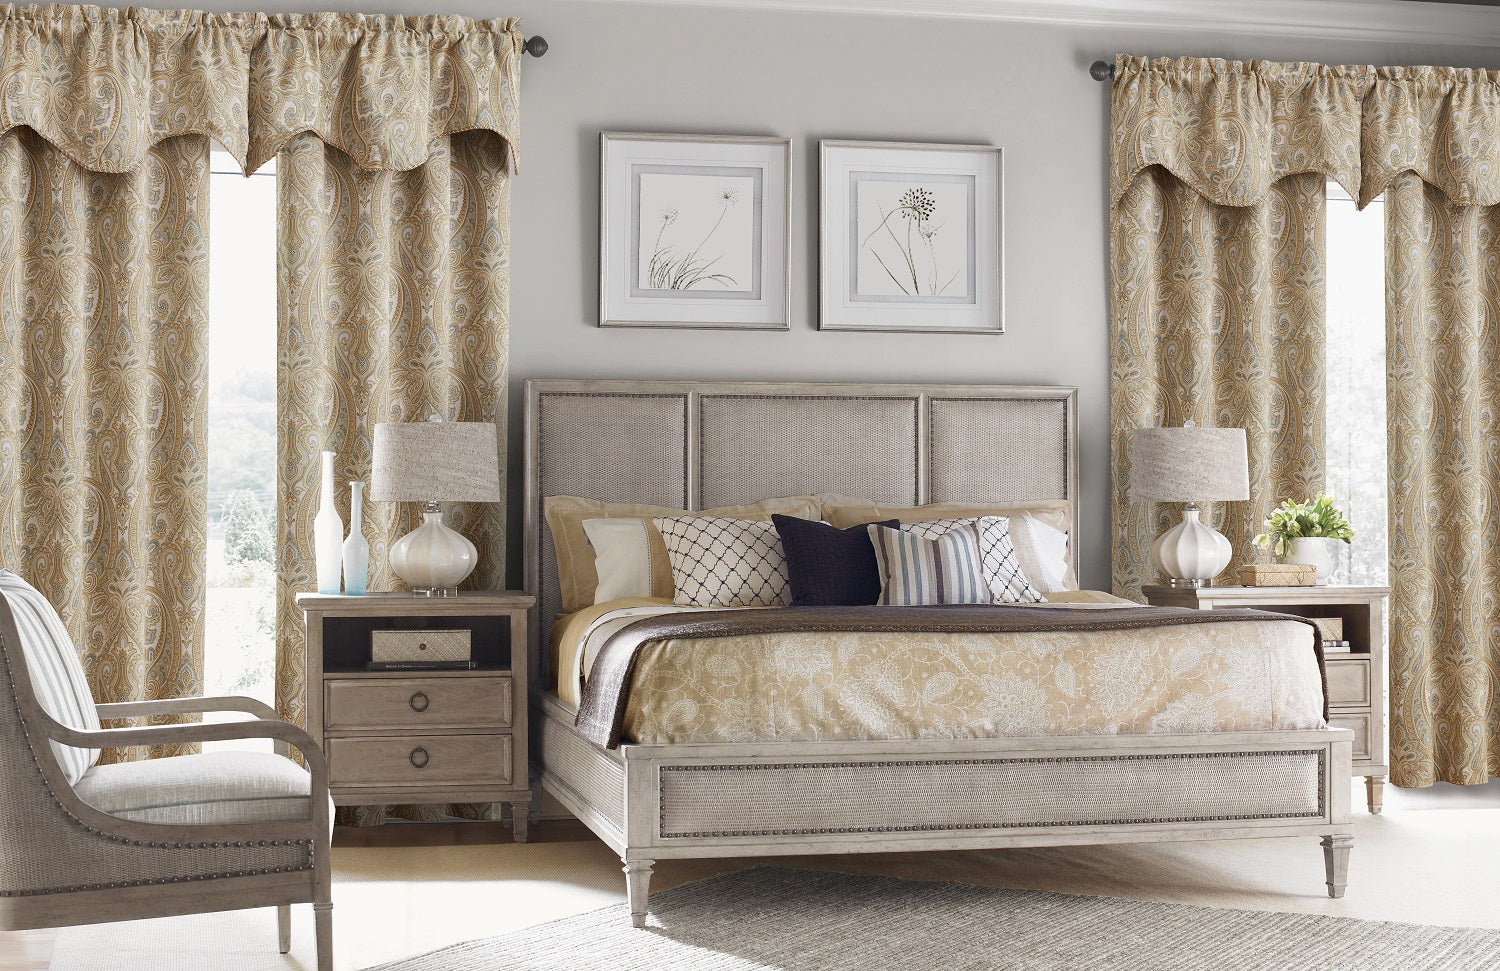 Frequently asked questions regarding curtains, styles, and patterns